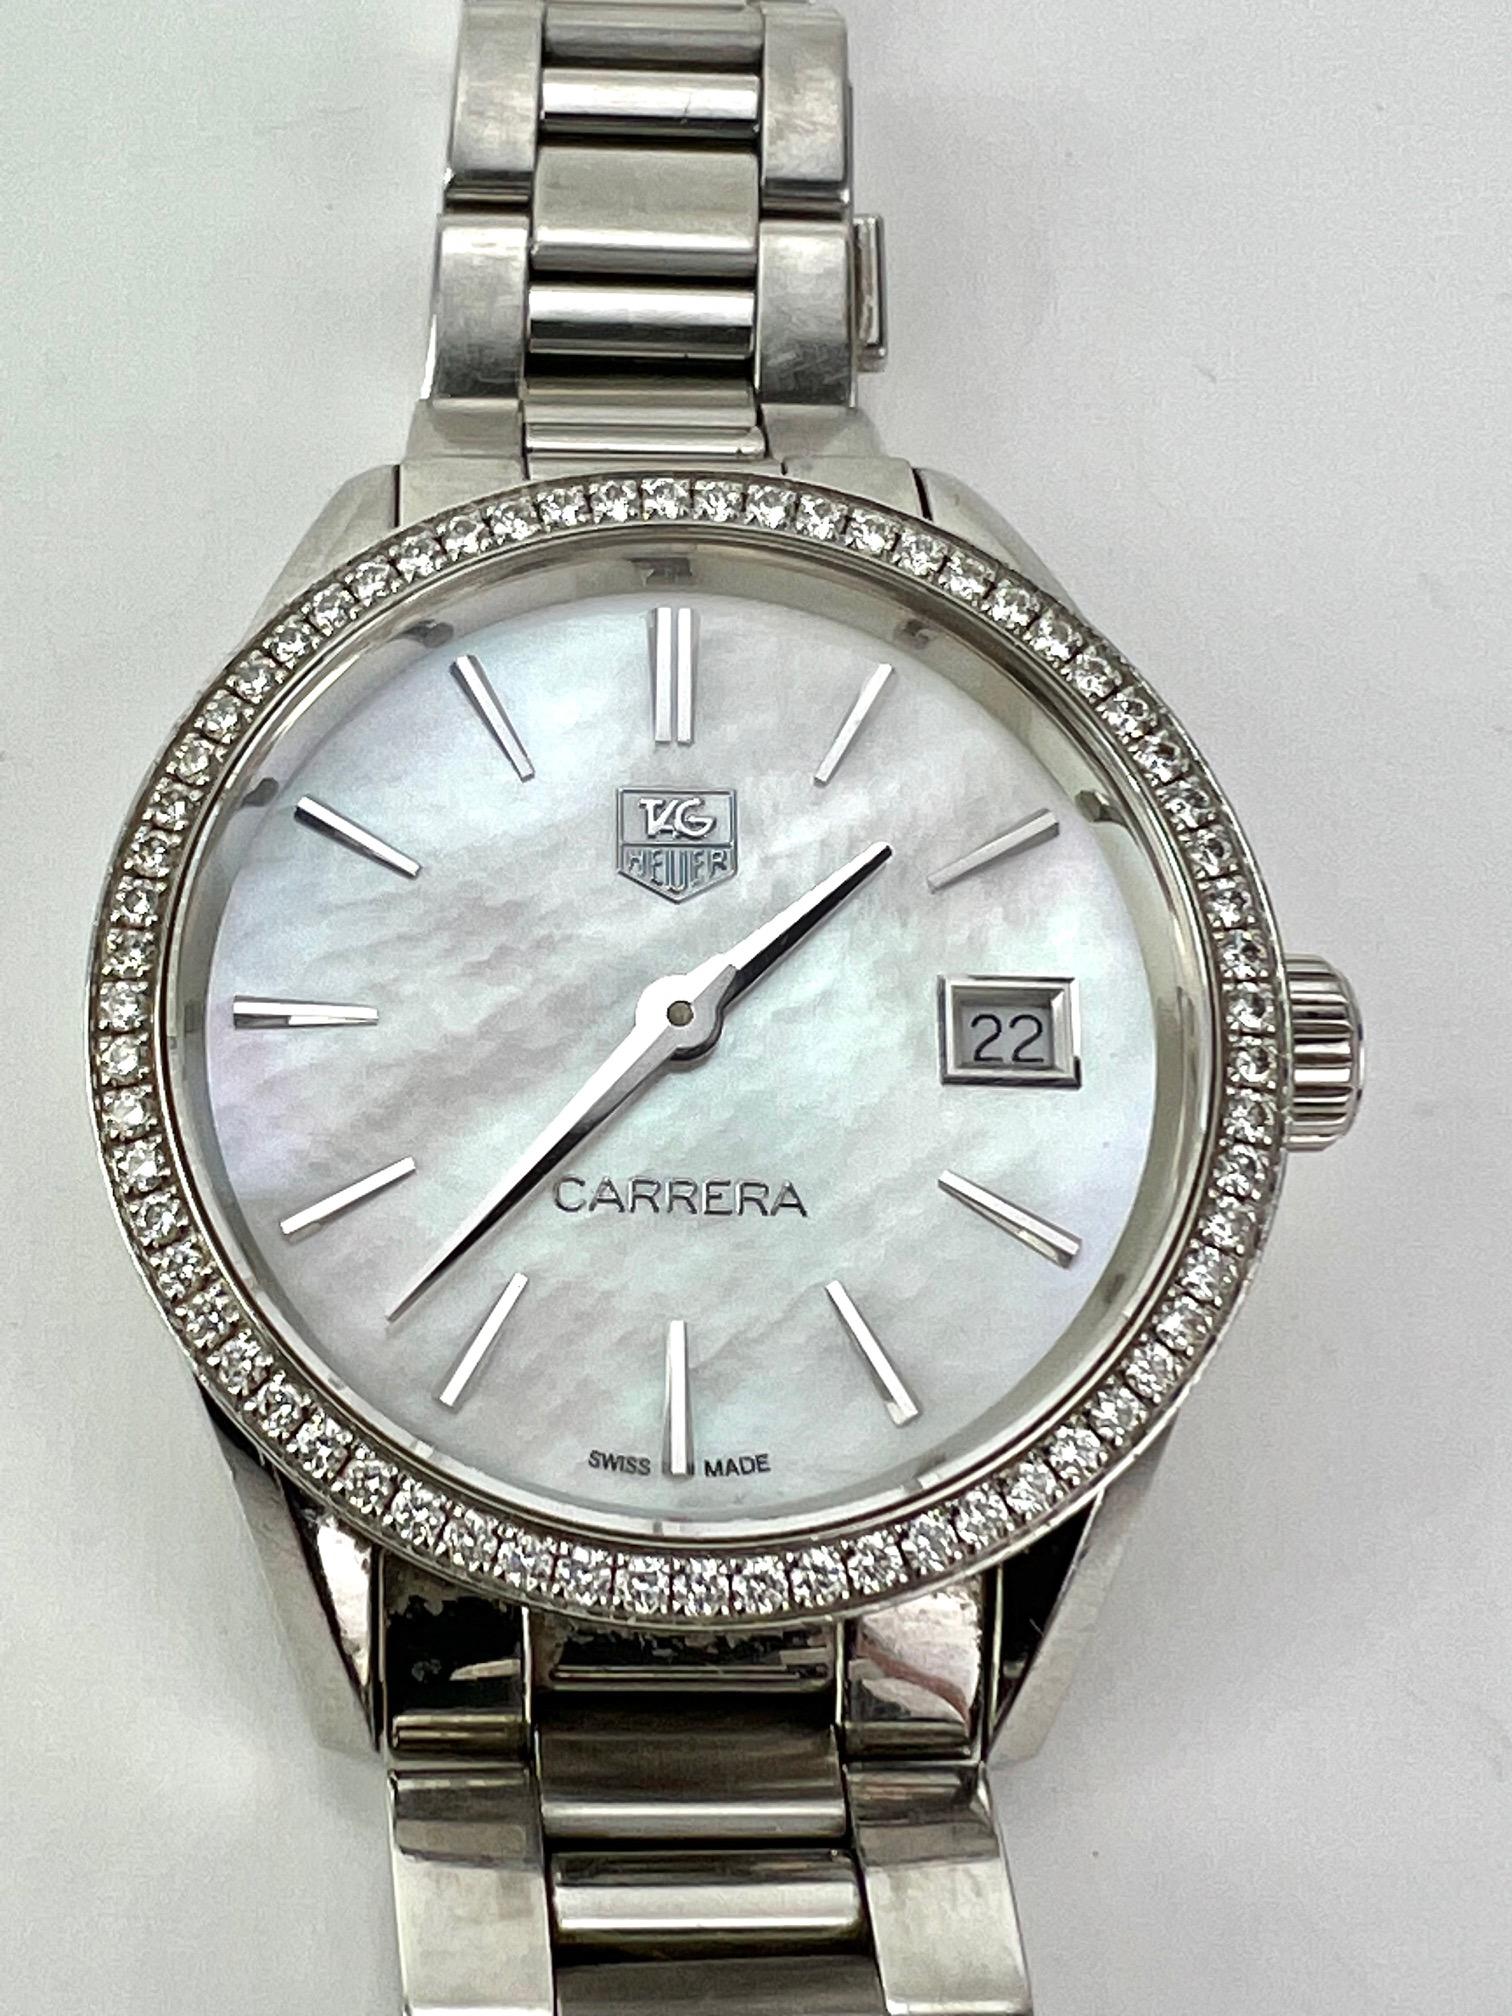 Preowned 100% Authentic
TAGHEUER Carrera Mother of pearl Diamond Bezel Date Watch
RATING: B-...Good, shows minor signs of use, 
has some scratches 
MODEL: WAR1315
ID NUMBER: WWA1900
GENDER: ladies
MATERIAL: stainless steel, mother-of-pearl
and